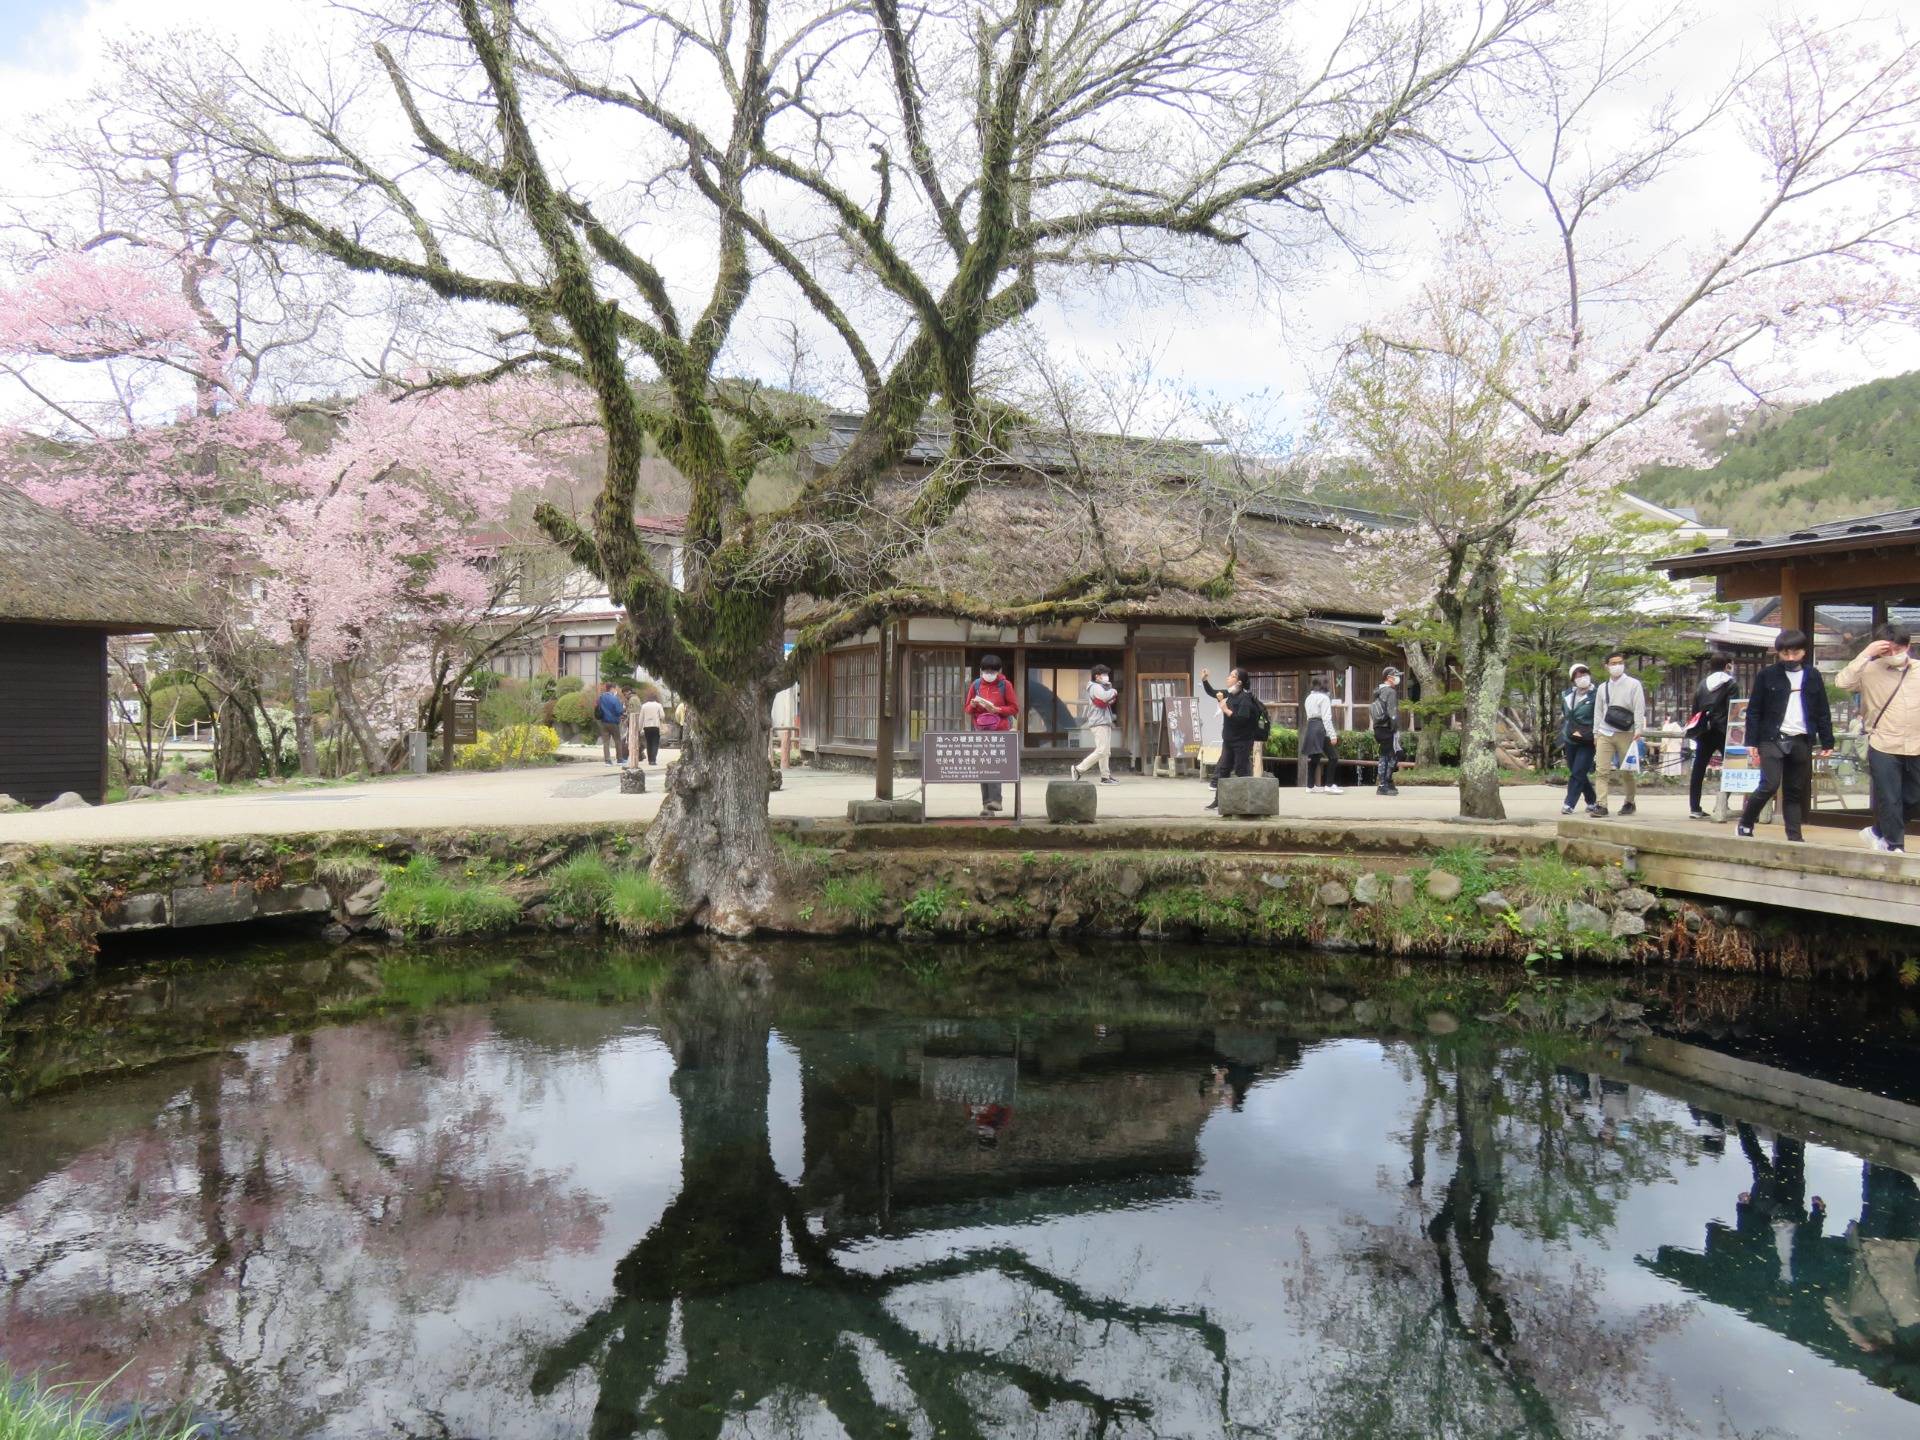 The rest of the ponds are right in the middle of Oshino